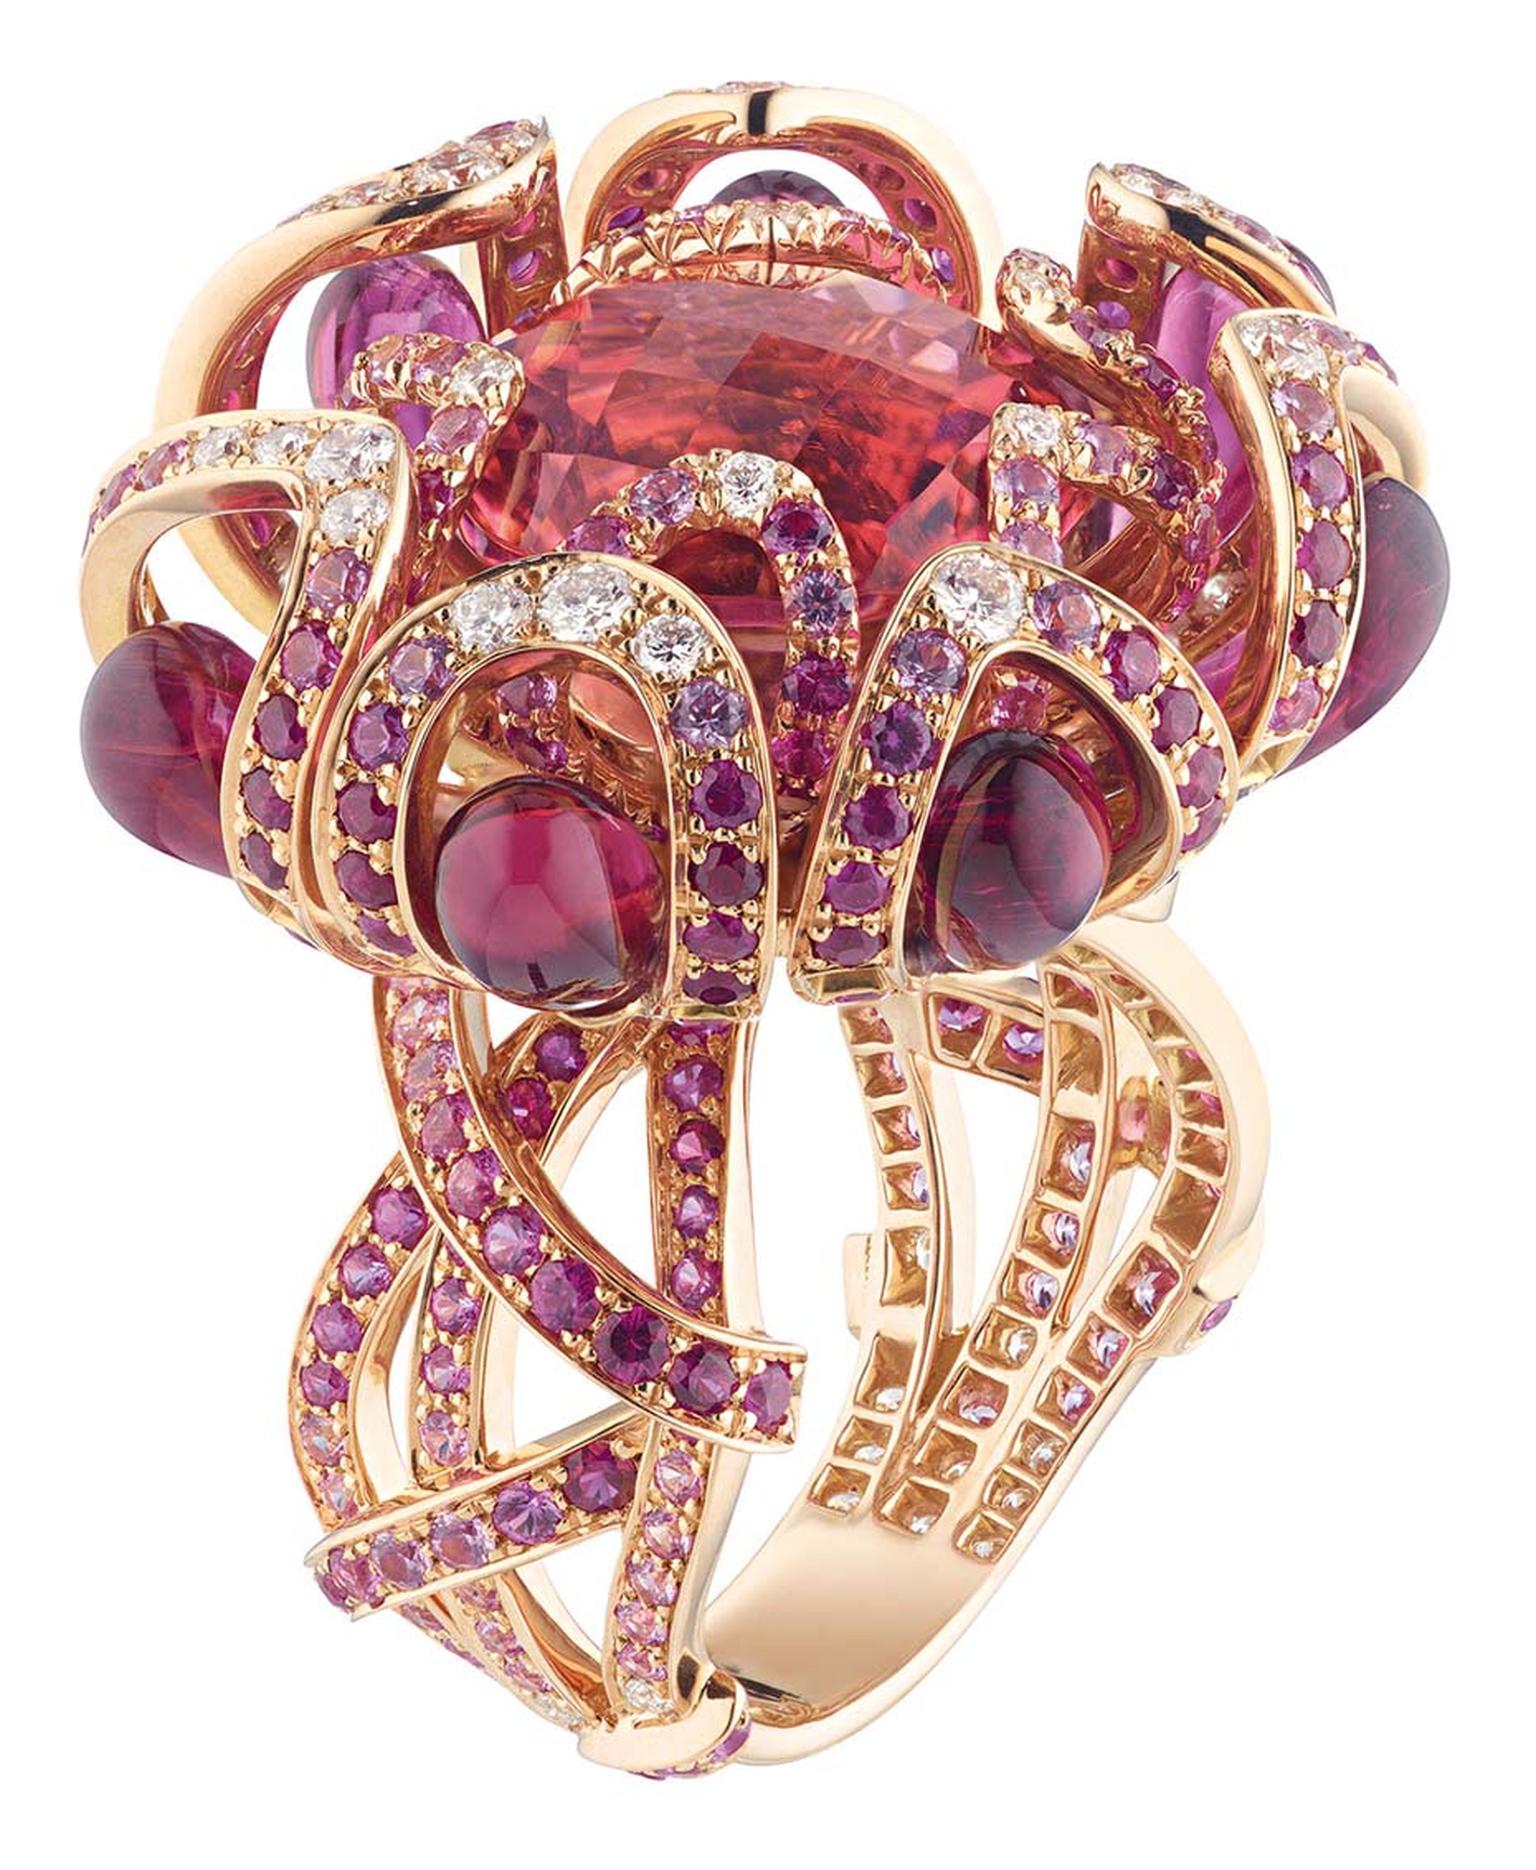 Chaumet Hortensia ring in rose gold, set with rubies, pink sapphires, diamonds, red tourmaline drops and an 8.60ct round faceted pink tourmaline in the centre.